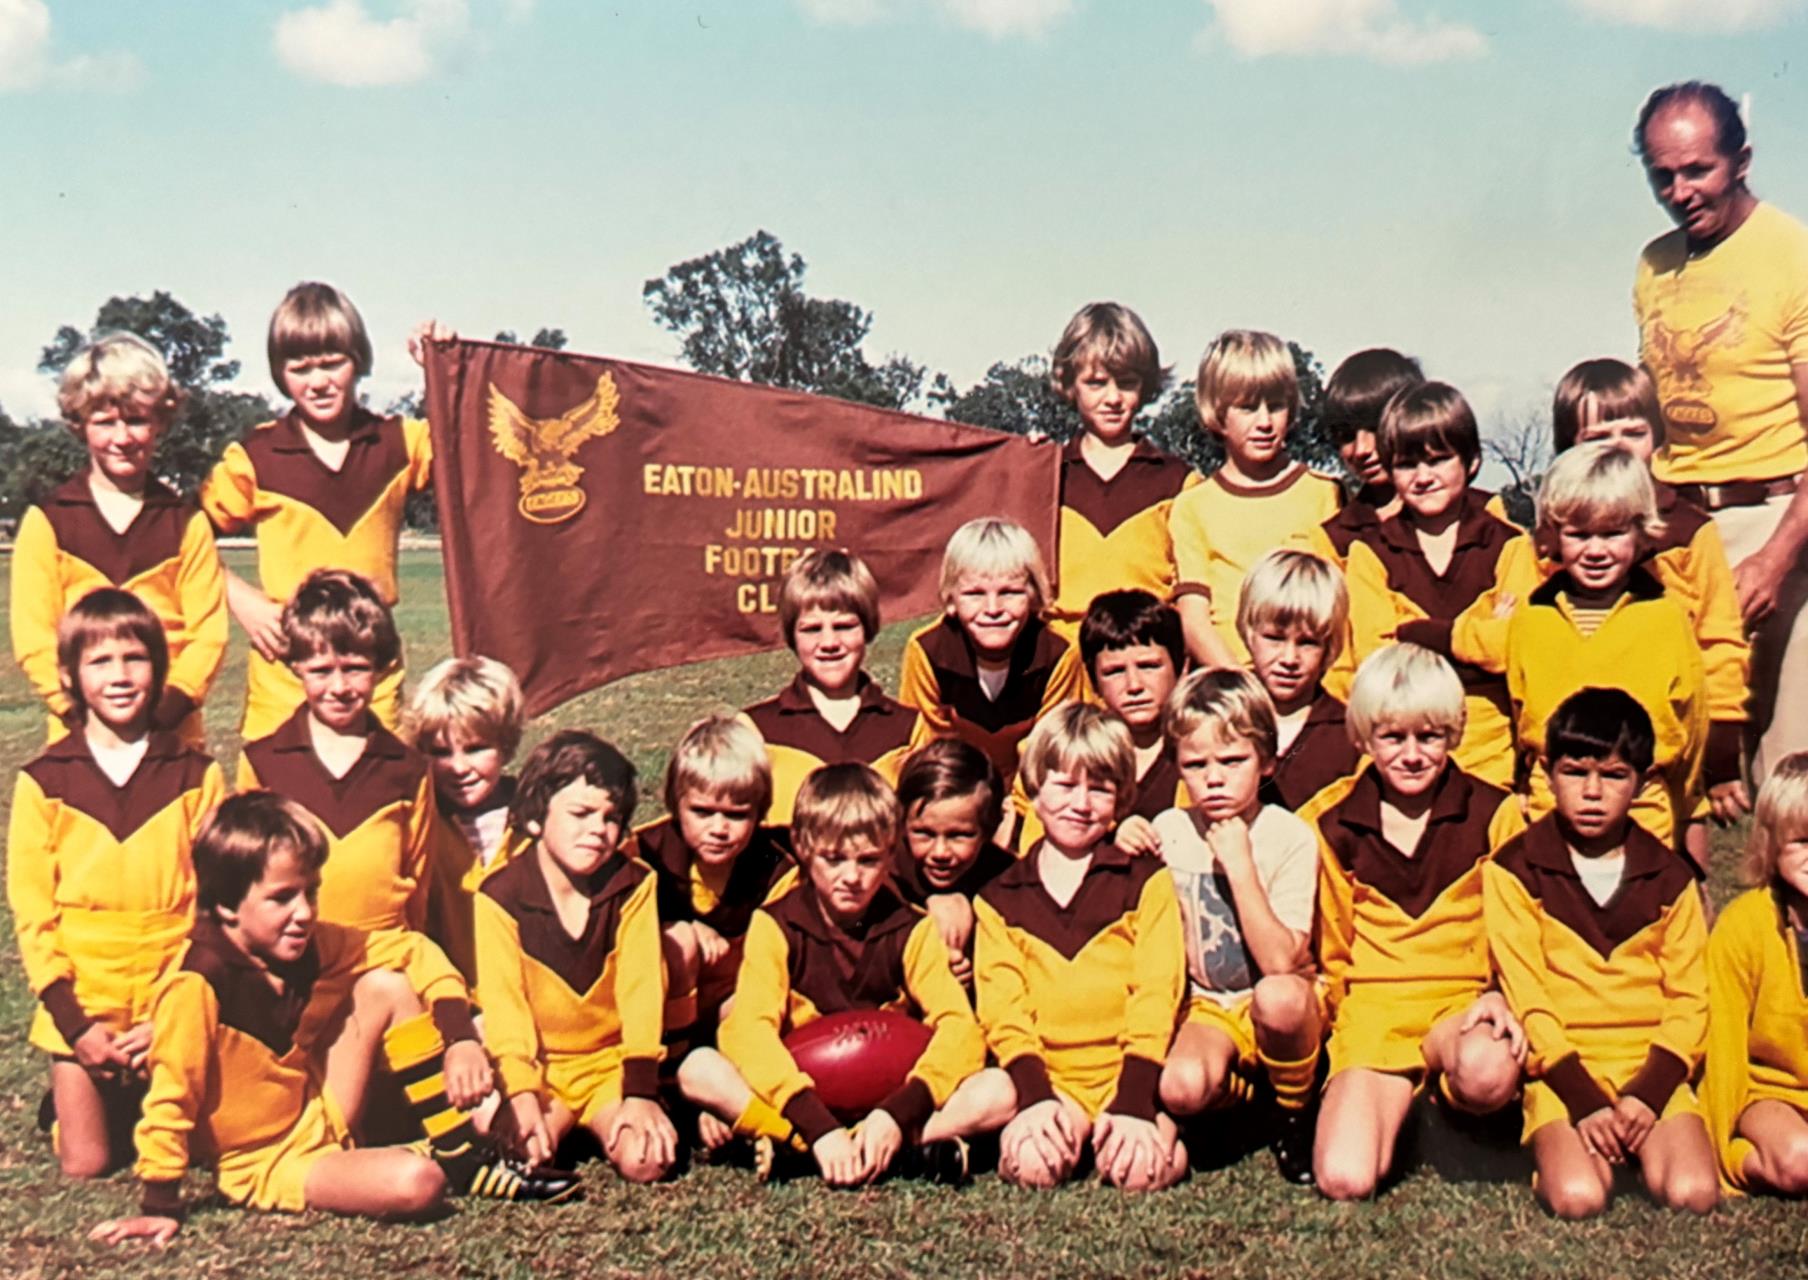 Reg Fishwick with the Eaton-Australind Junior Football Club players in the 1970s